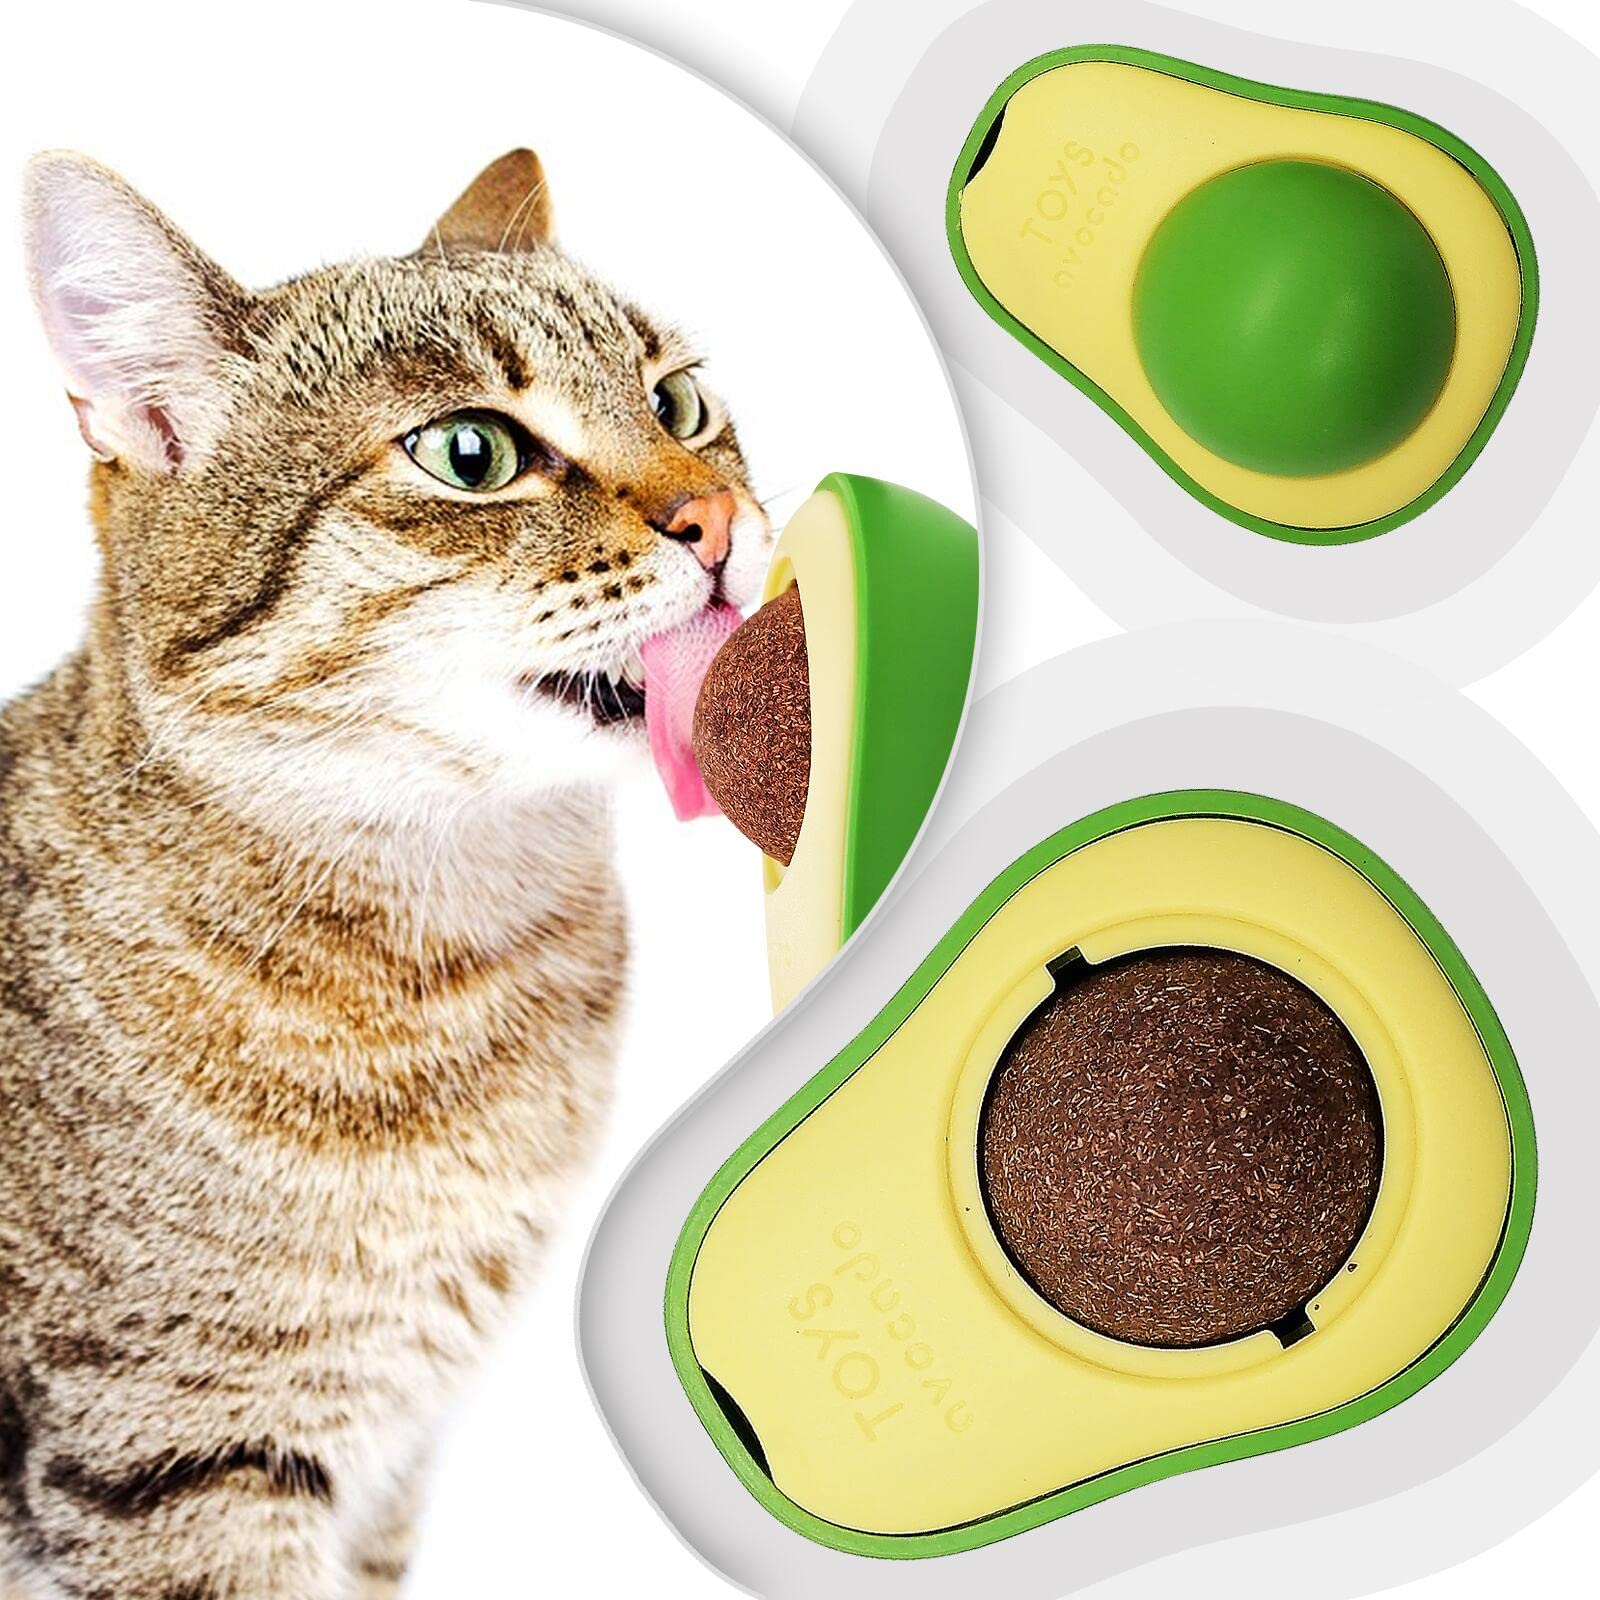 Keep Your Dog Entertained with the Mint-Infused Avocado Ball Toy!